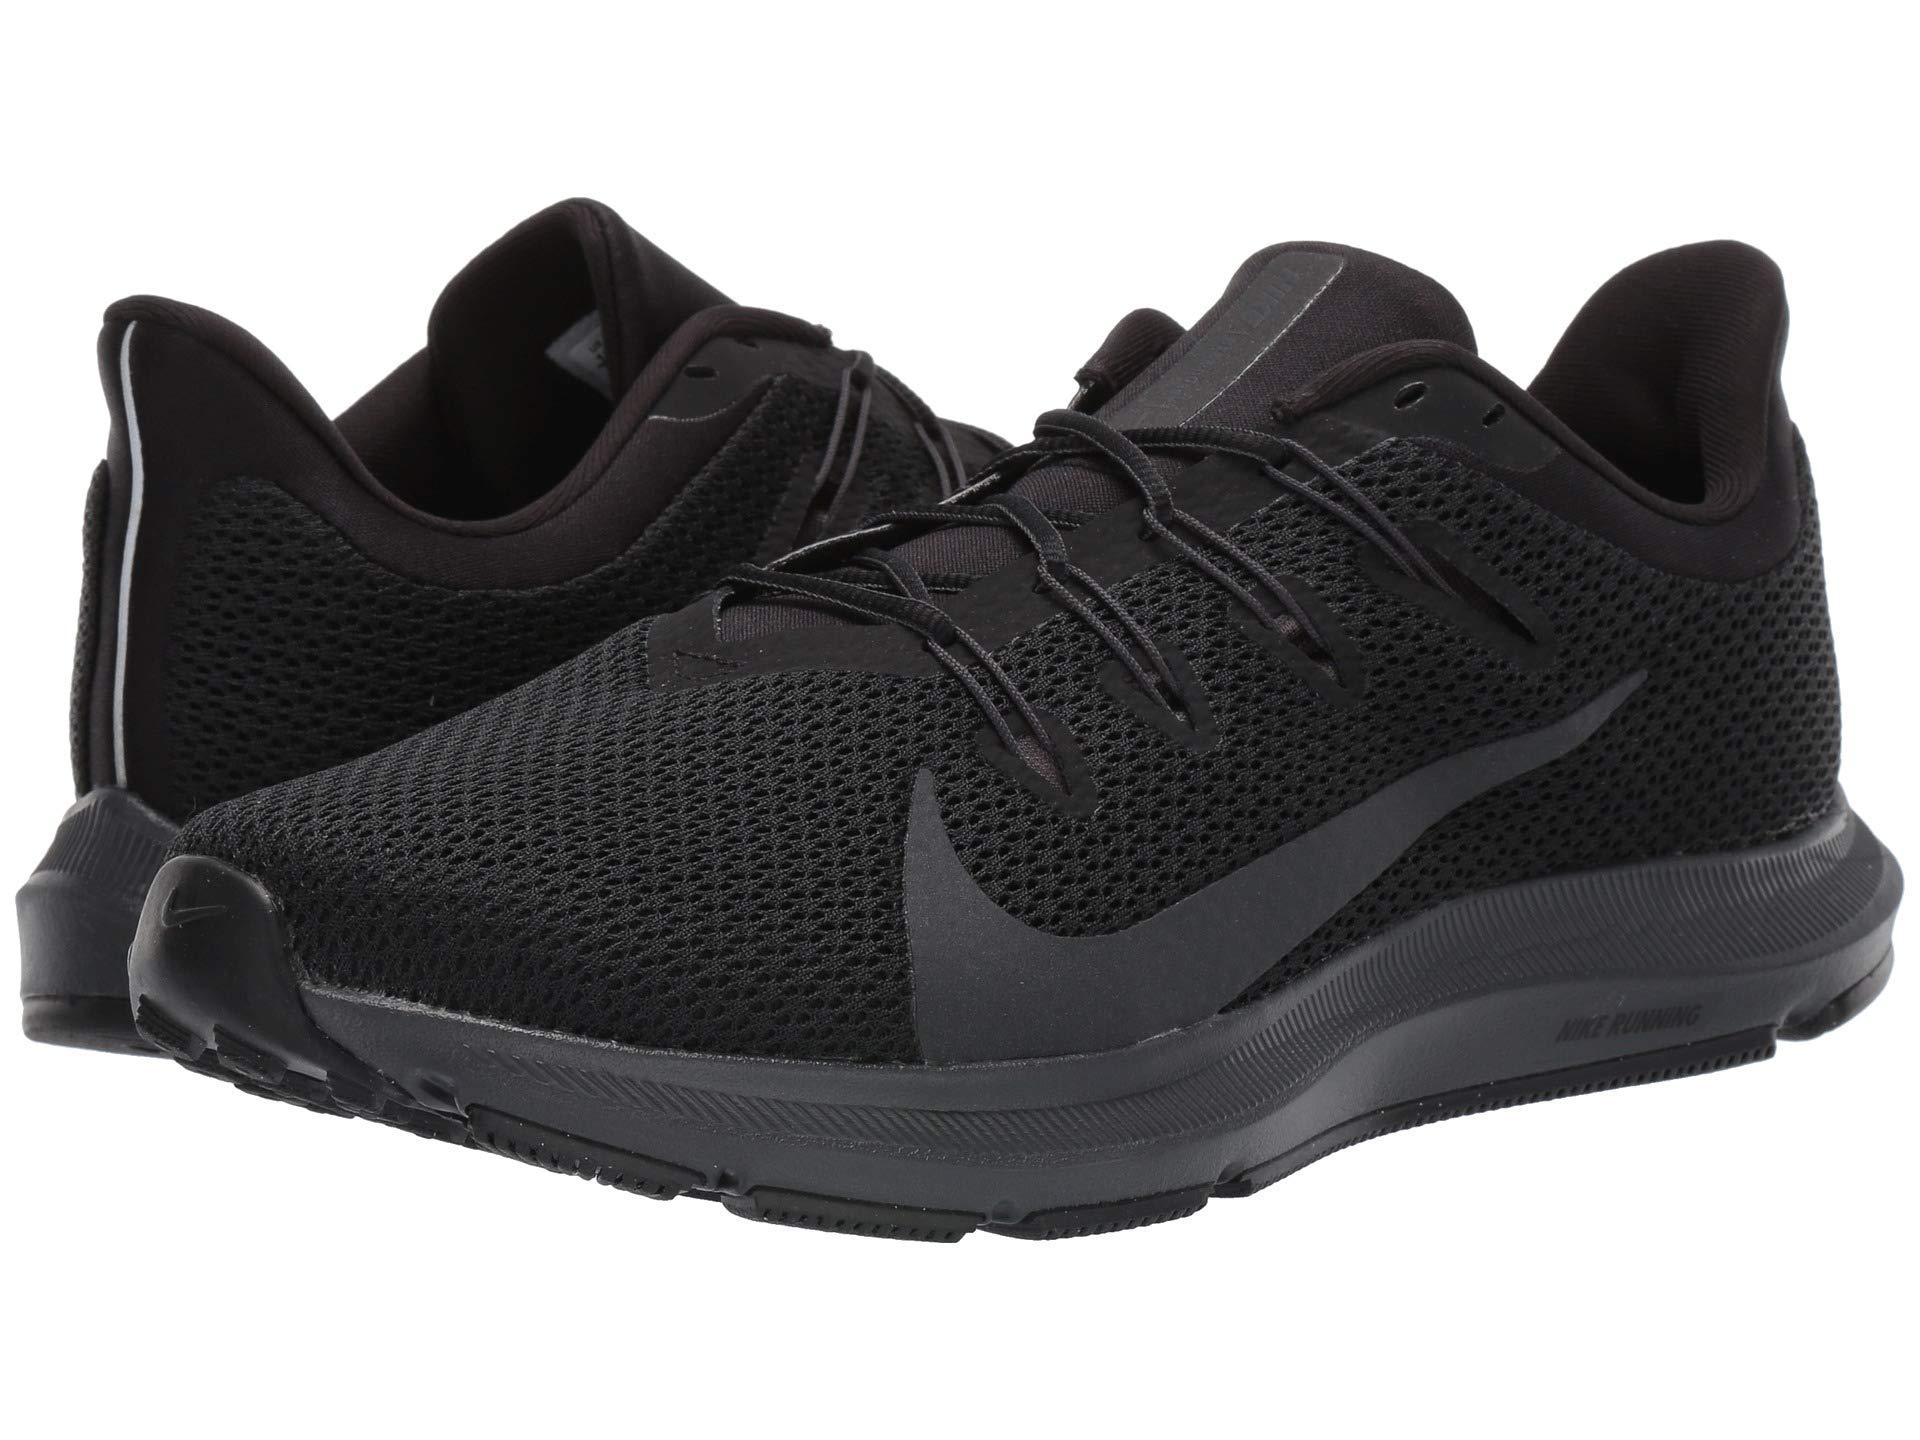 Nike Synthetic Quest 2 Trainers In Triple Black for Men - Save 24% - Lyst